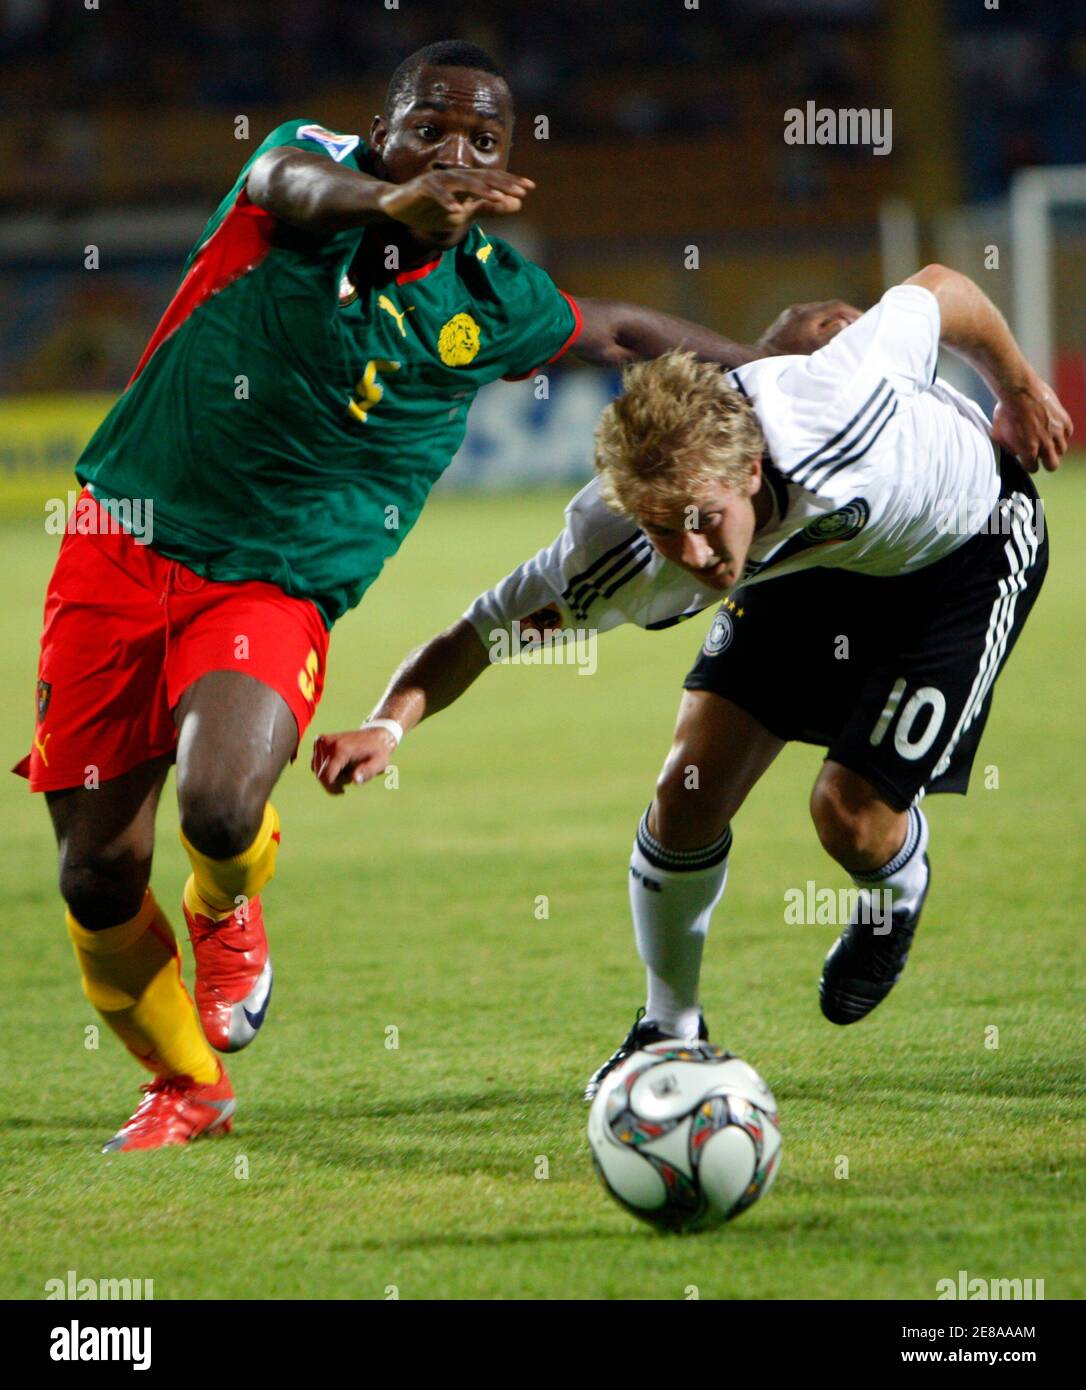 Lewis Holtby of Germany (R) is challenged by Enow Tabot of Cameroon (L) during their FIFA U-20 World Cup group C soccer match in Ismailia October 2, 2009. REUTERS/Goran Tomasevic (EGYPT SPORT SOCCER) Stock Photo